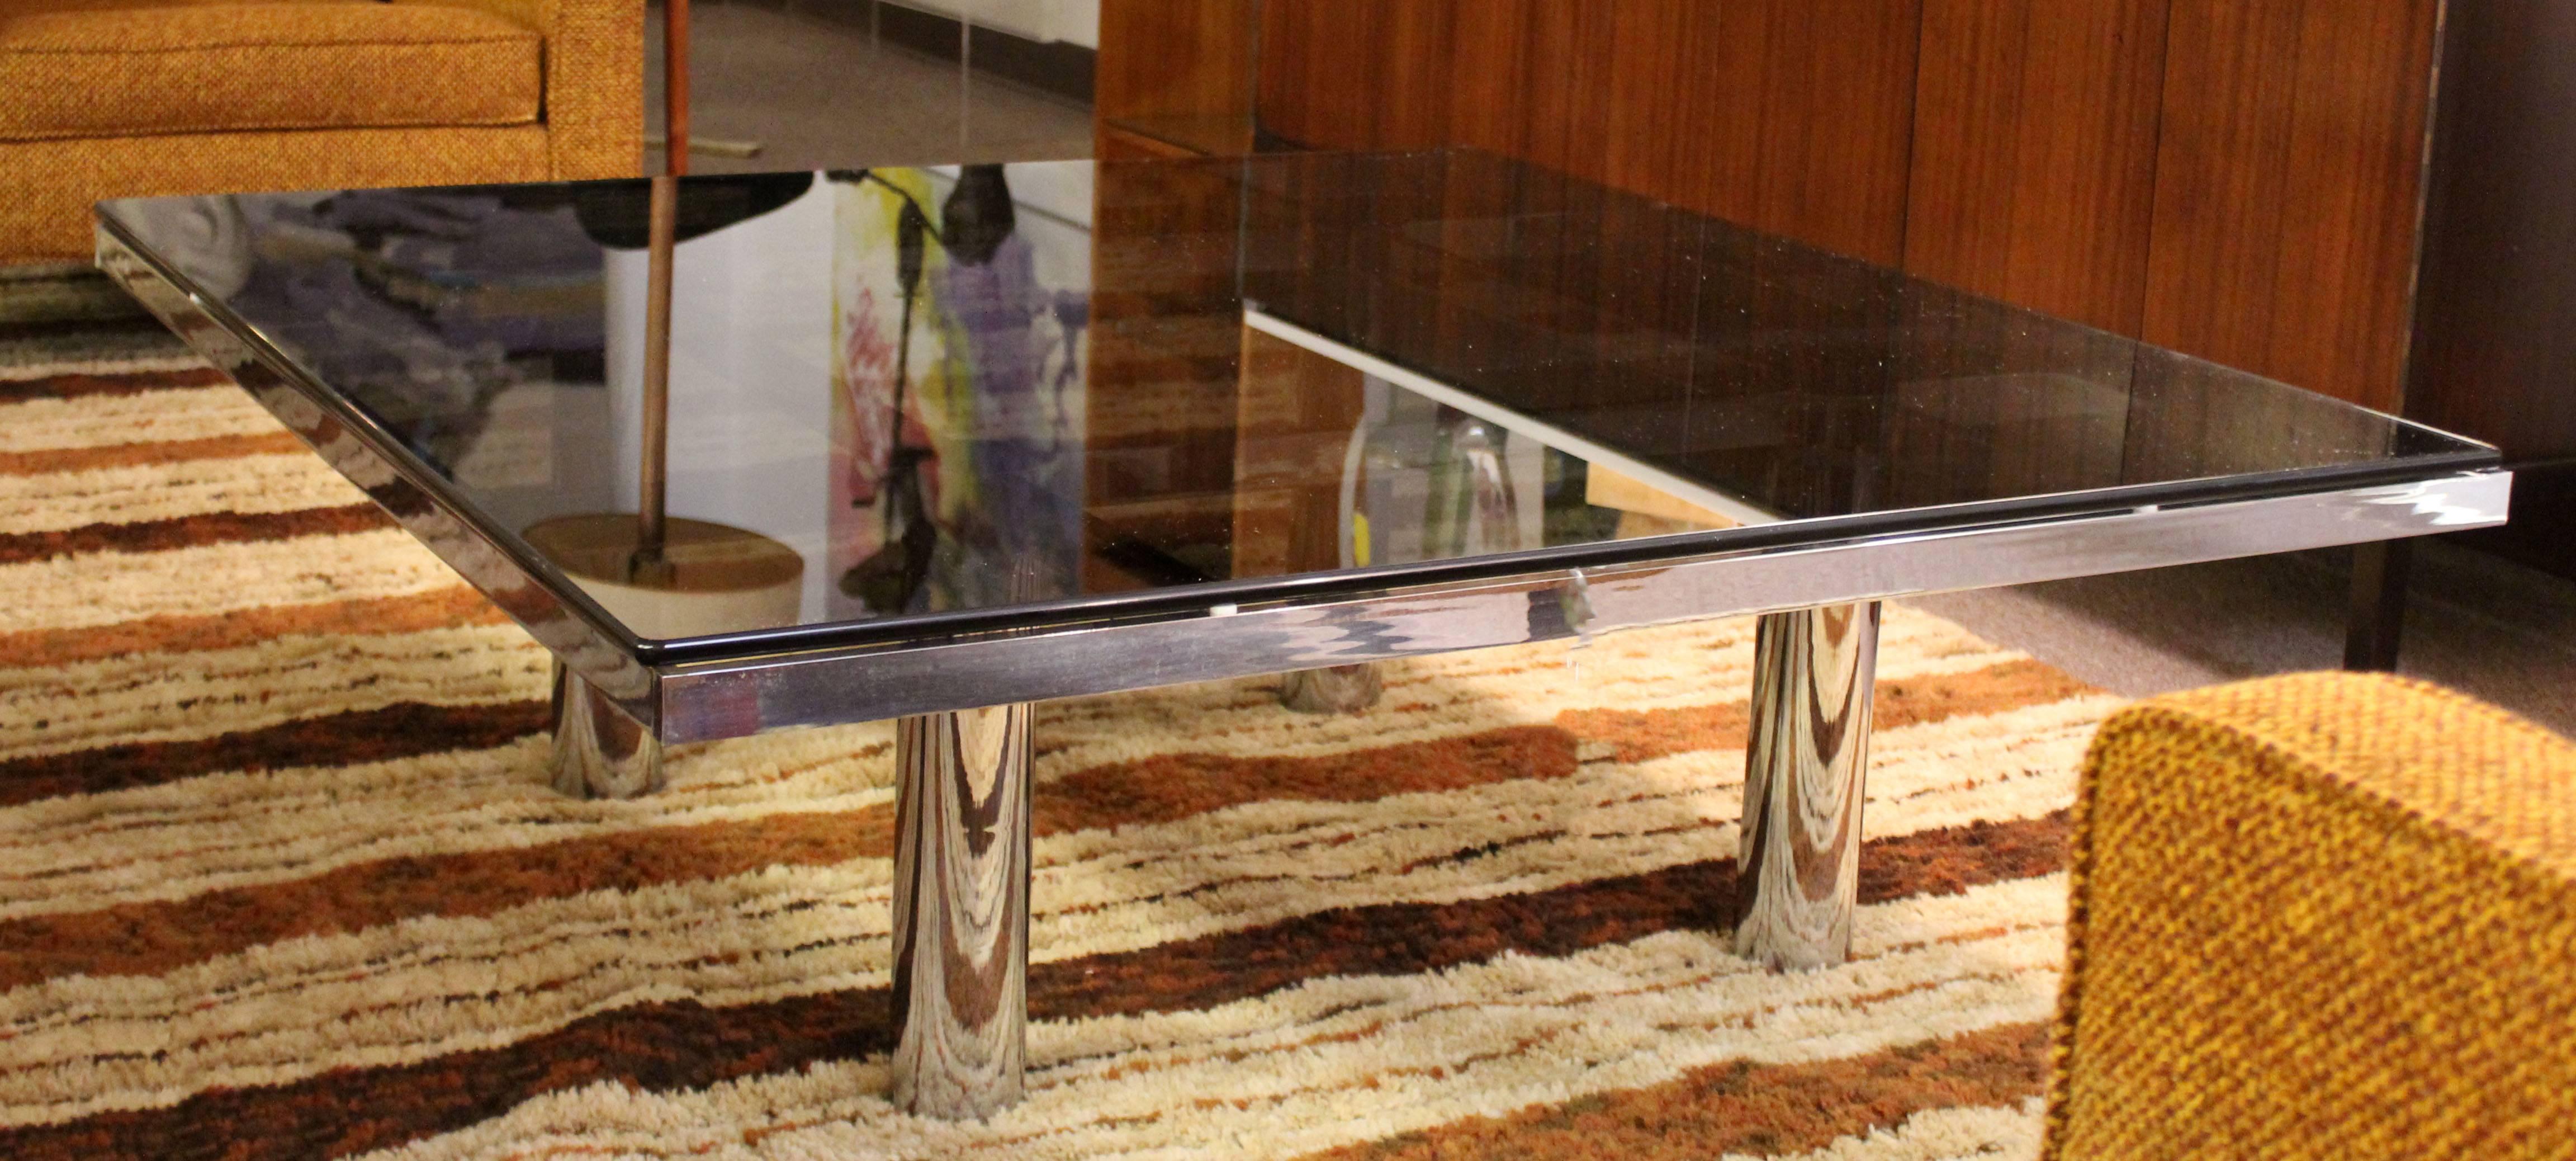 American Mid-Century Modern Tobia Scarpa Knoll Andre Chrome Smoked Glass Coffee Table